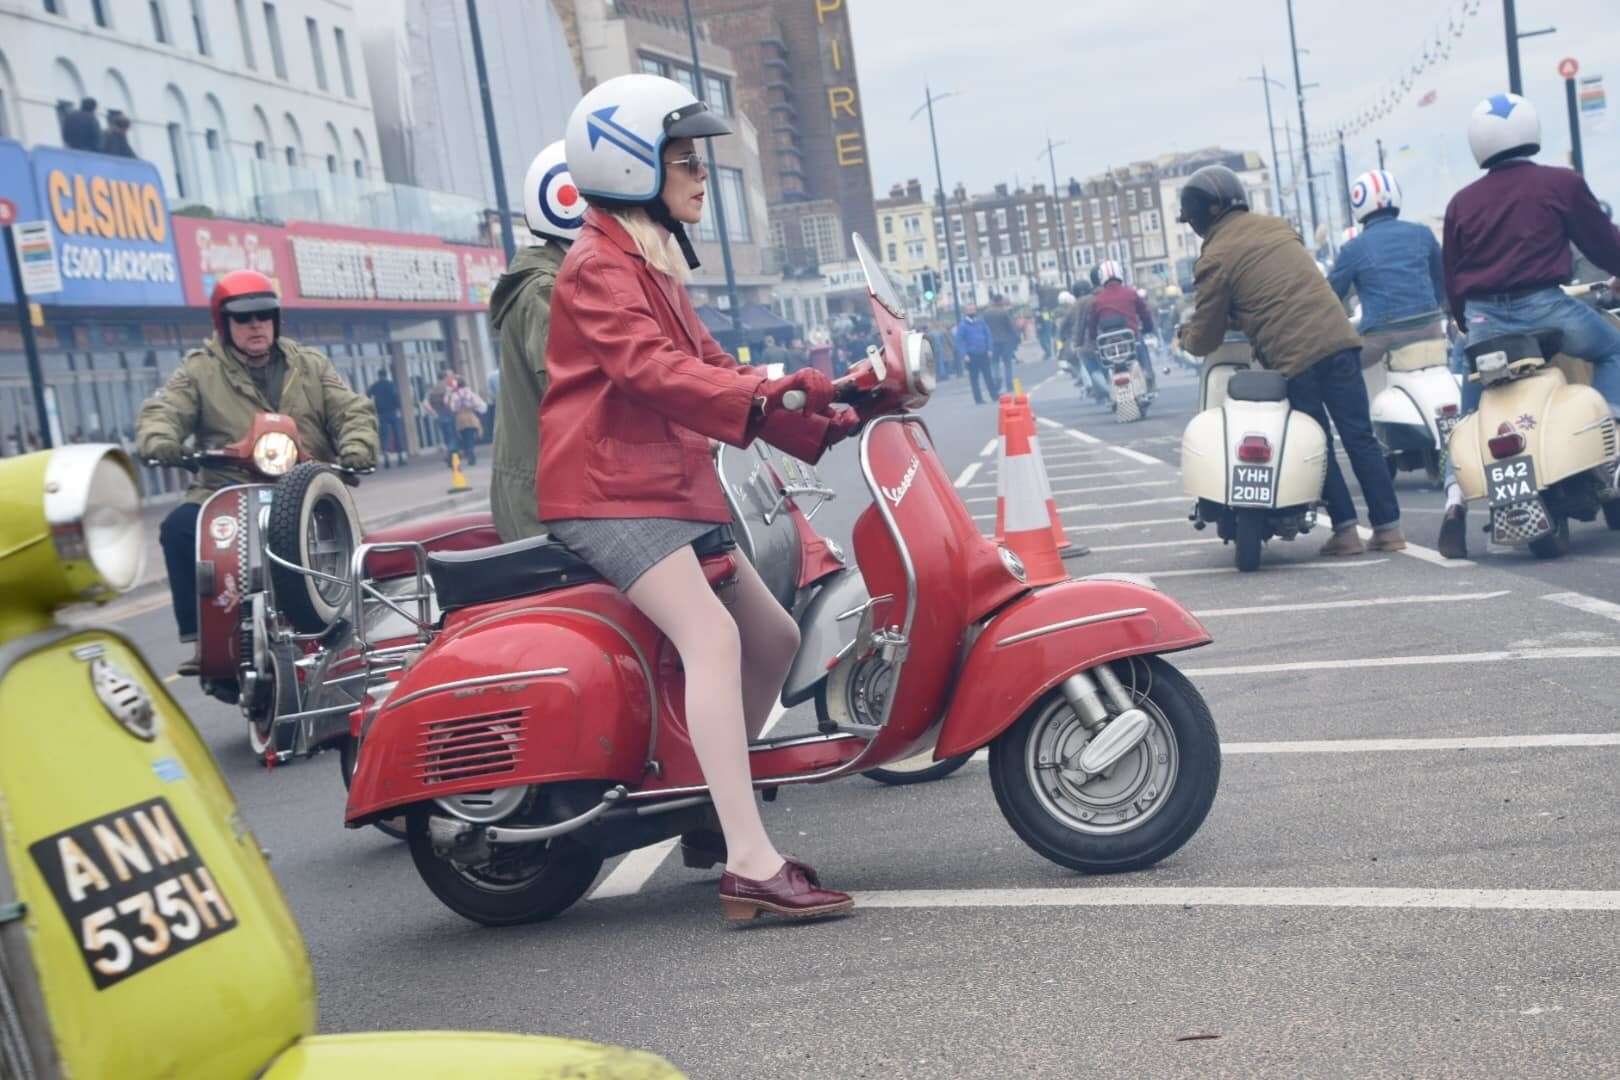 A woman dressed in red was seen among the group of mods. Picture: Roberto Fabiani